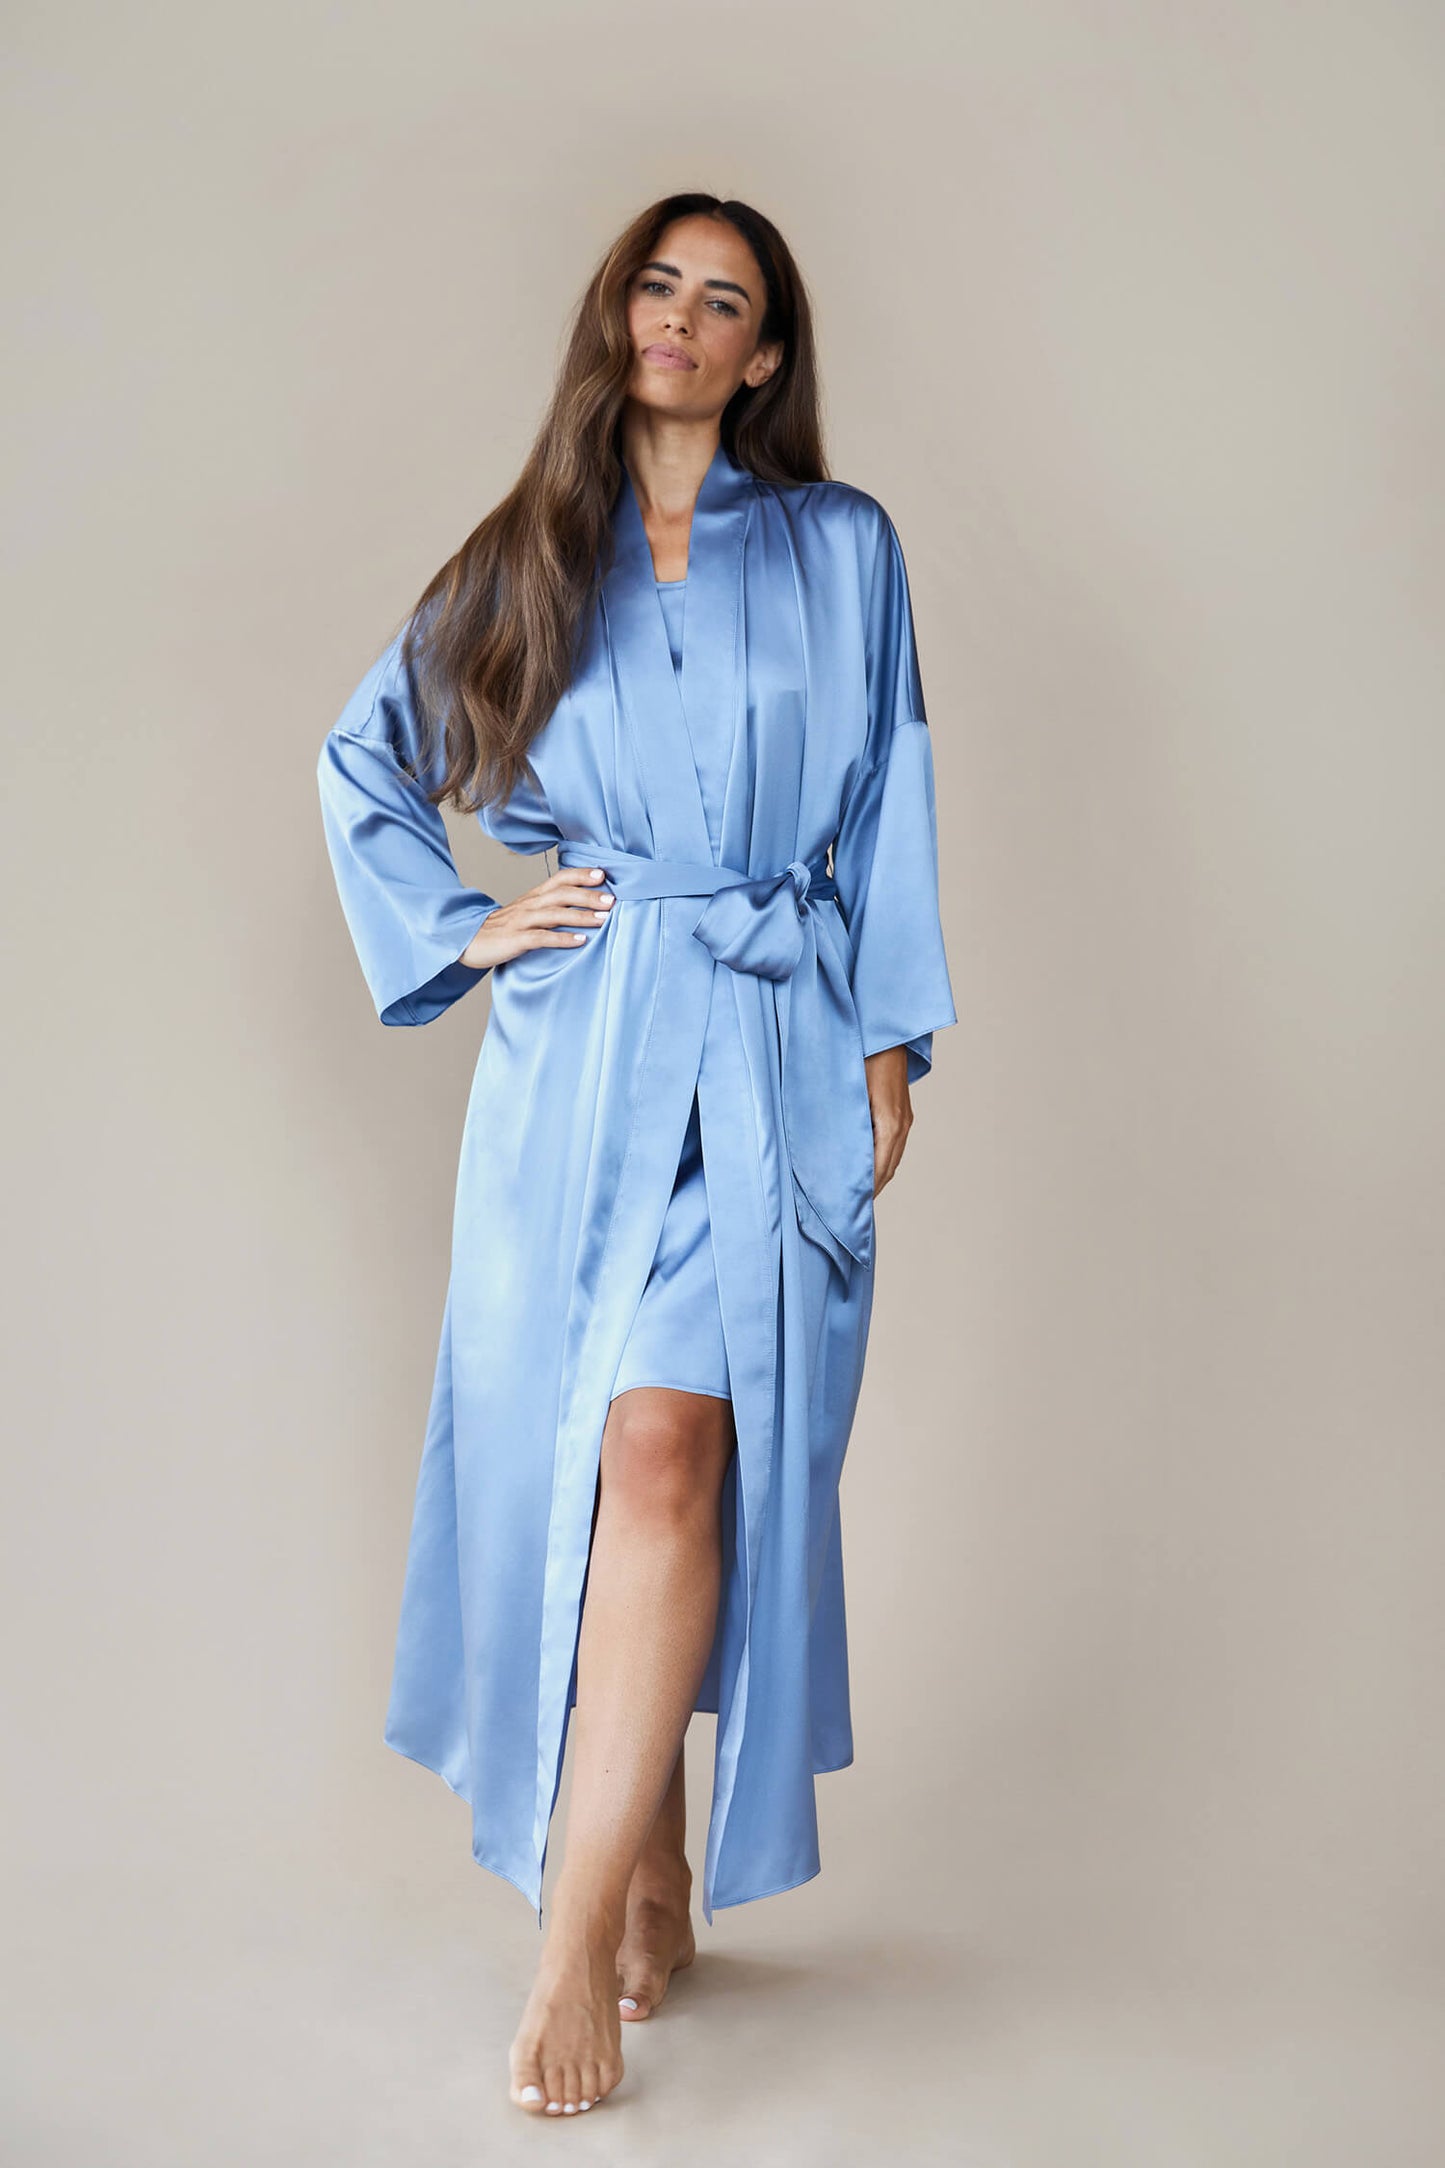 Model wears a  kimono style luxury silk robe In blue tied at the waist using a bow. She looks to the camera confidently with one hand on her hip, revealing a hint of a silk dress underneath, with one leg rested in front of the other